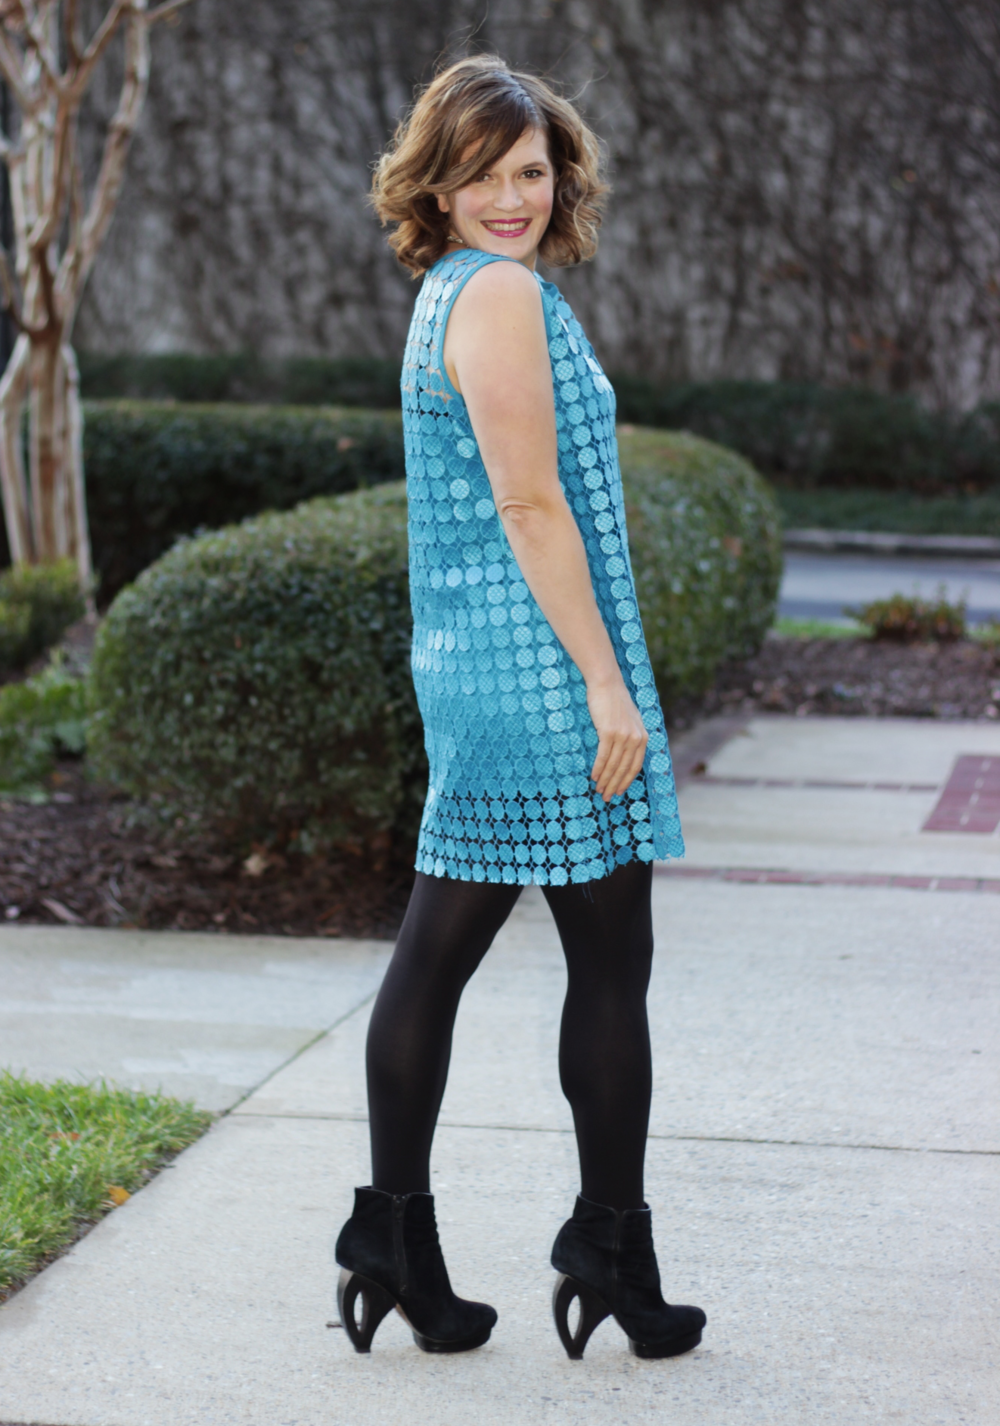 NEW YEAR’S EVE DRESS – BLUE AND GEOMETRIC